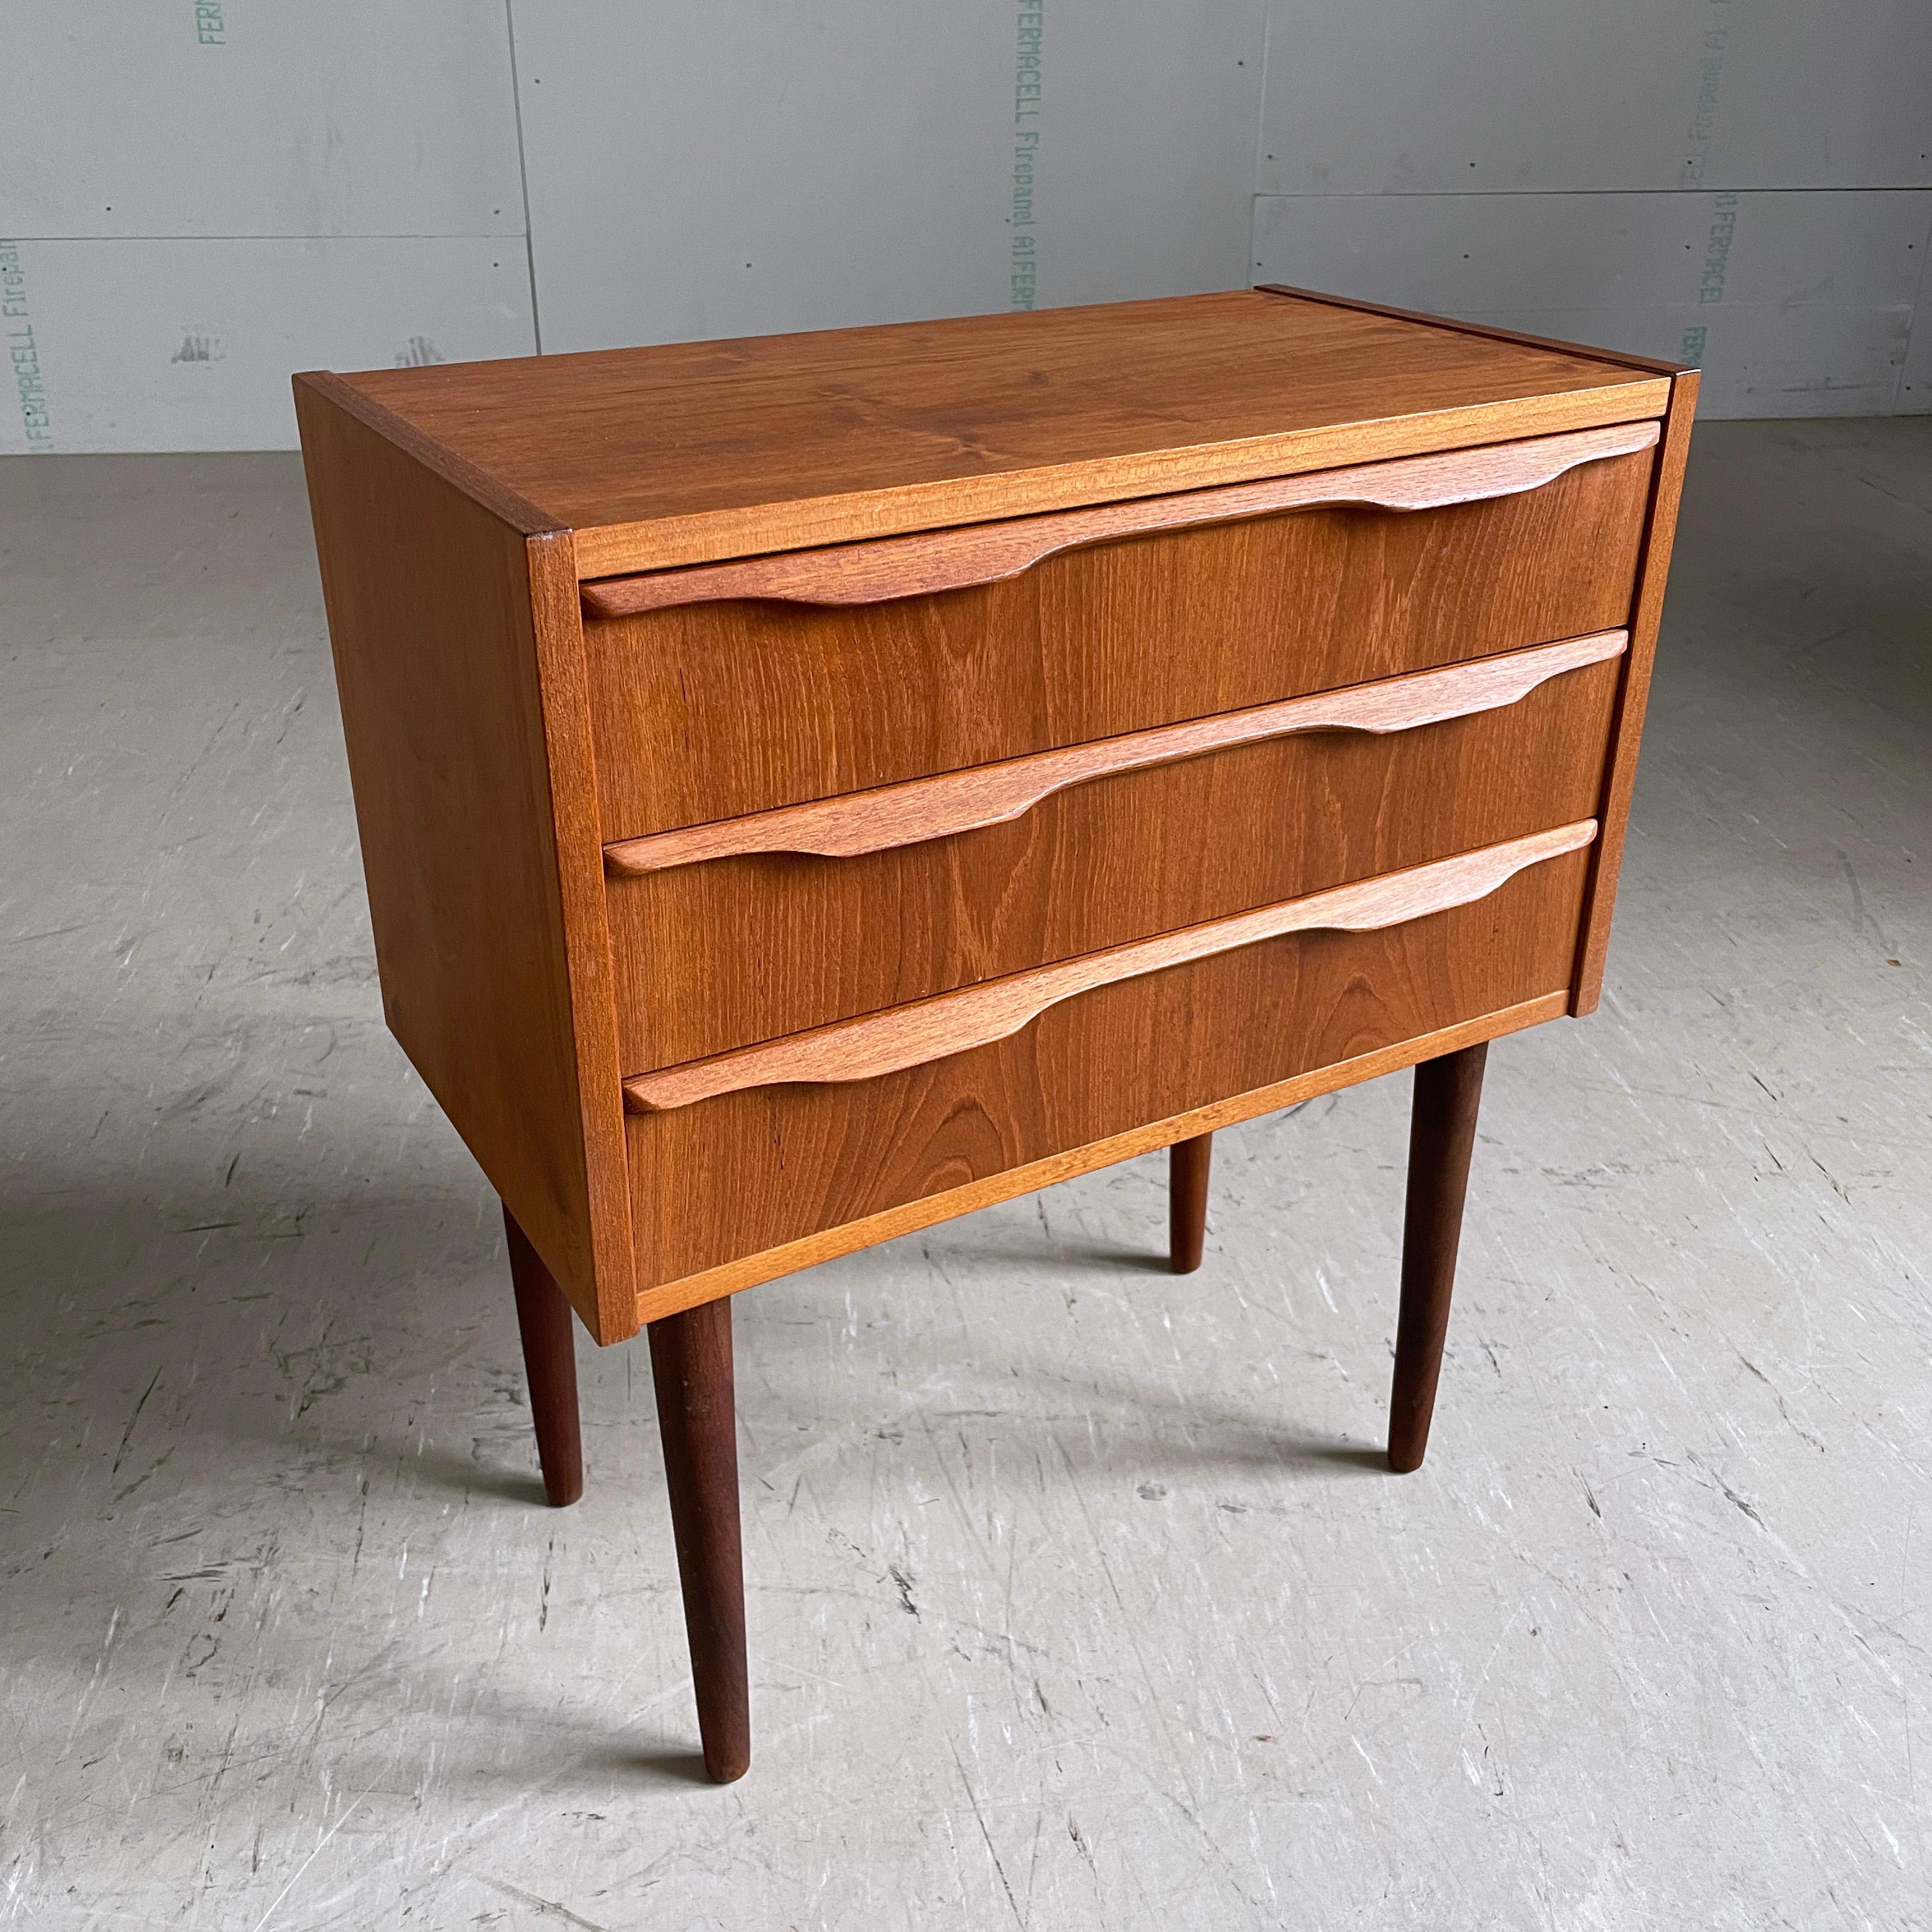 1960's Teak Bedside Drawers / Cabinet In Good Condition For Sale In Bern, CH